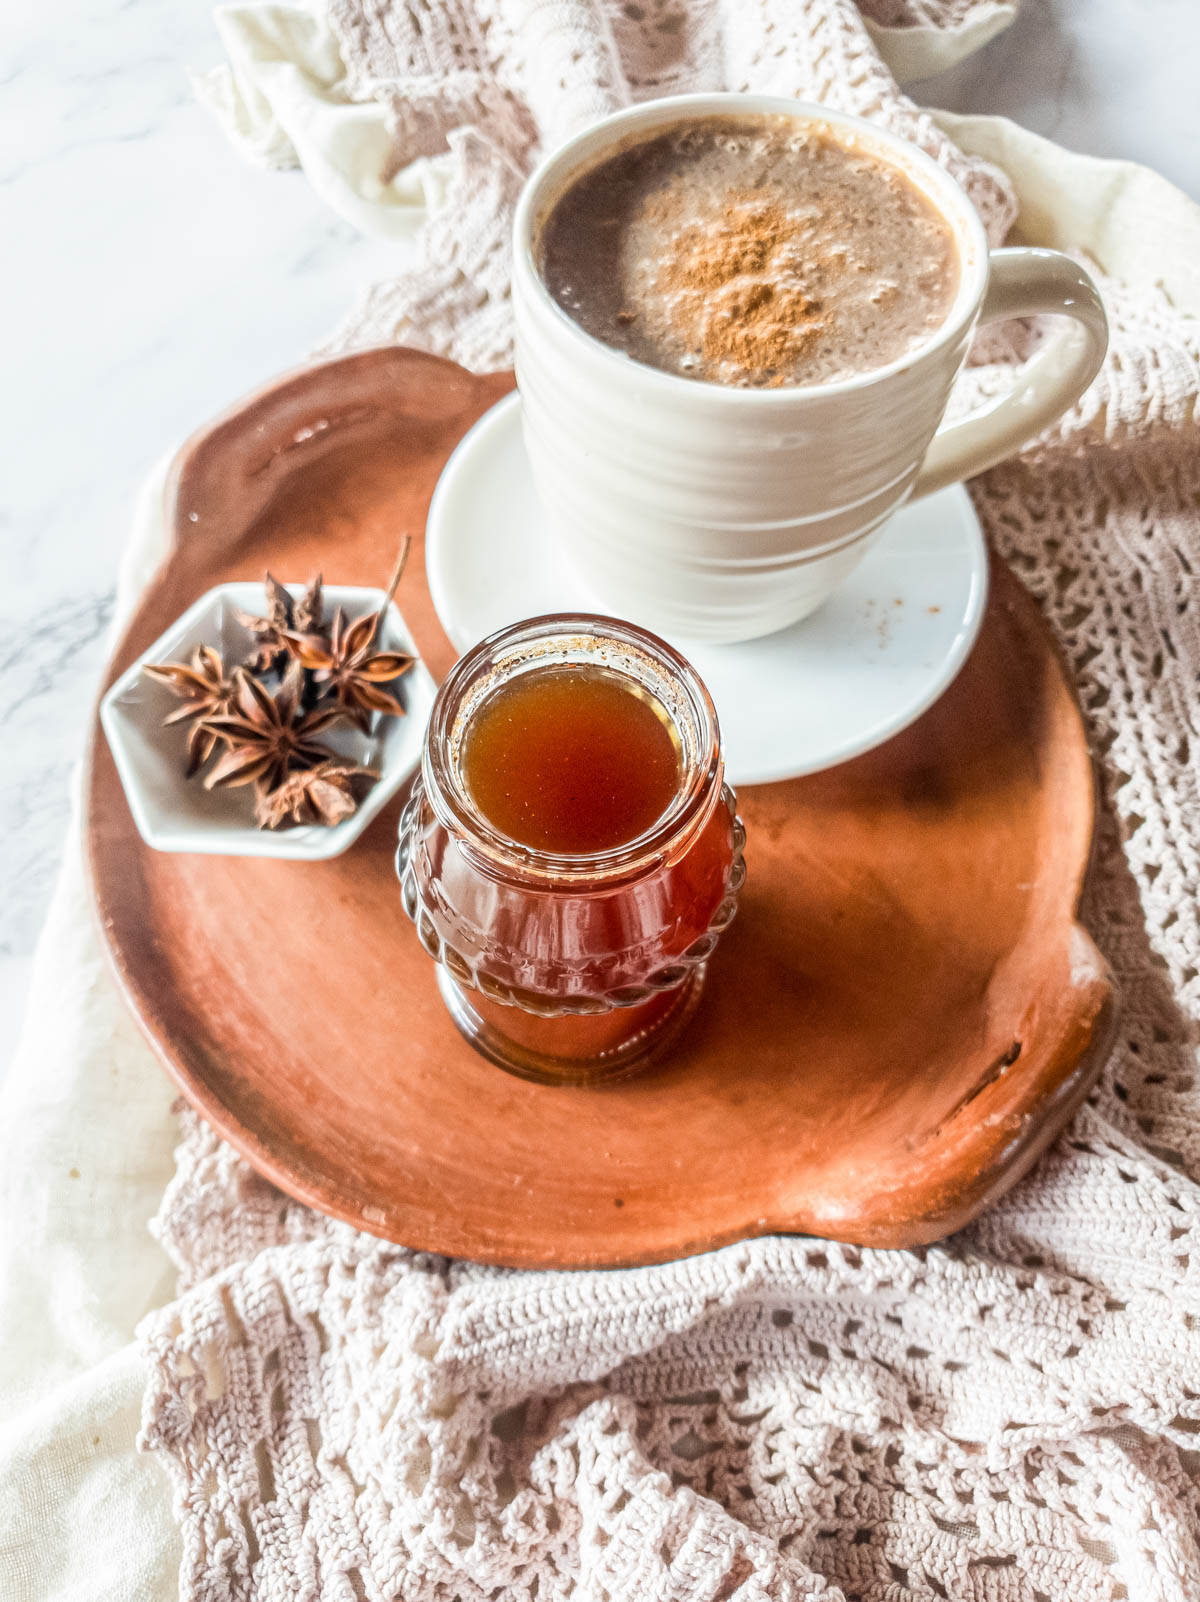 Terra cotta tray with chai latte and spiced simple syrup in glass jar.